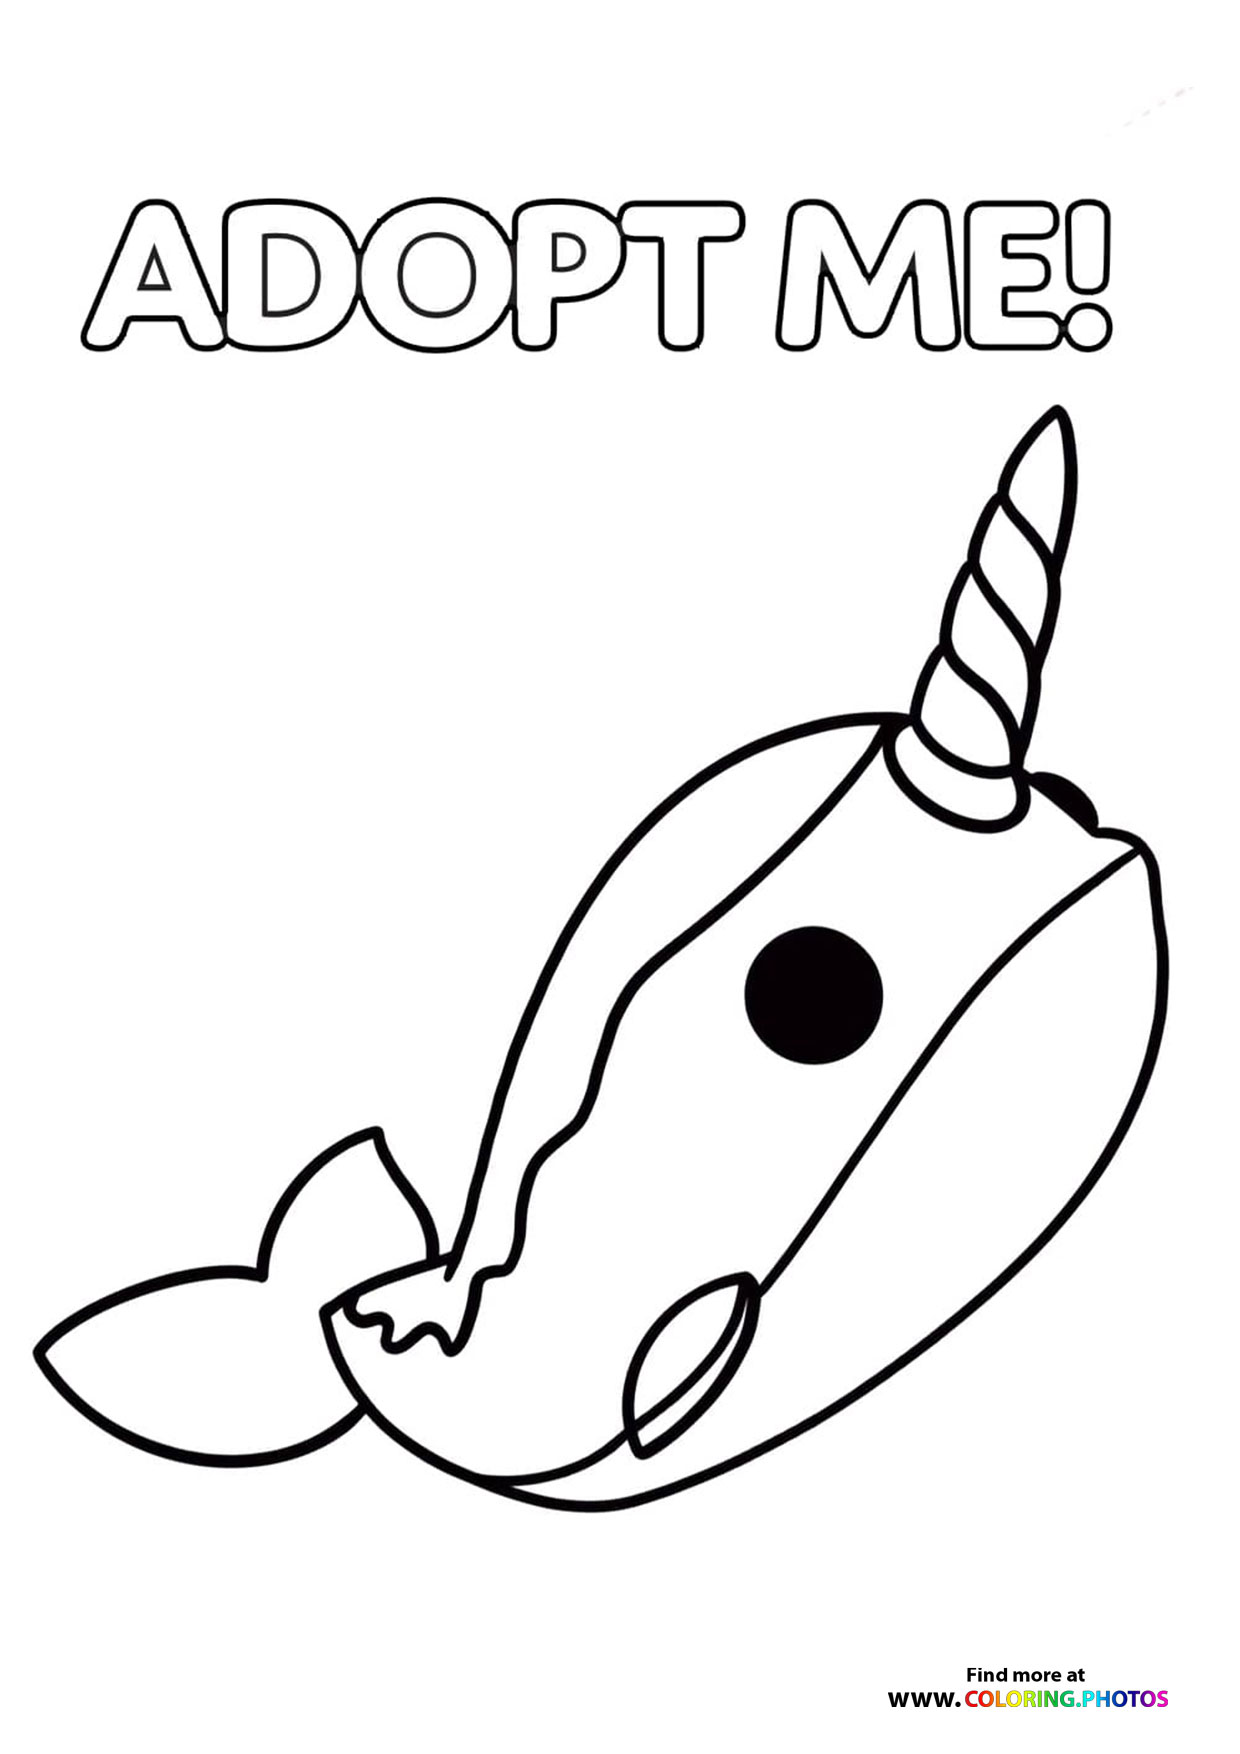 Adopt me Roblox! Narwhal - Coloring Pages for kids